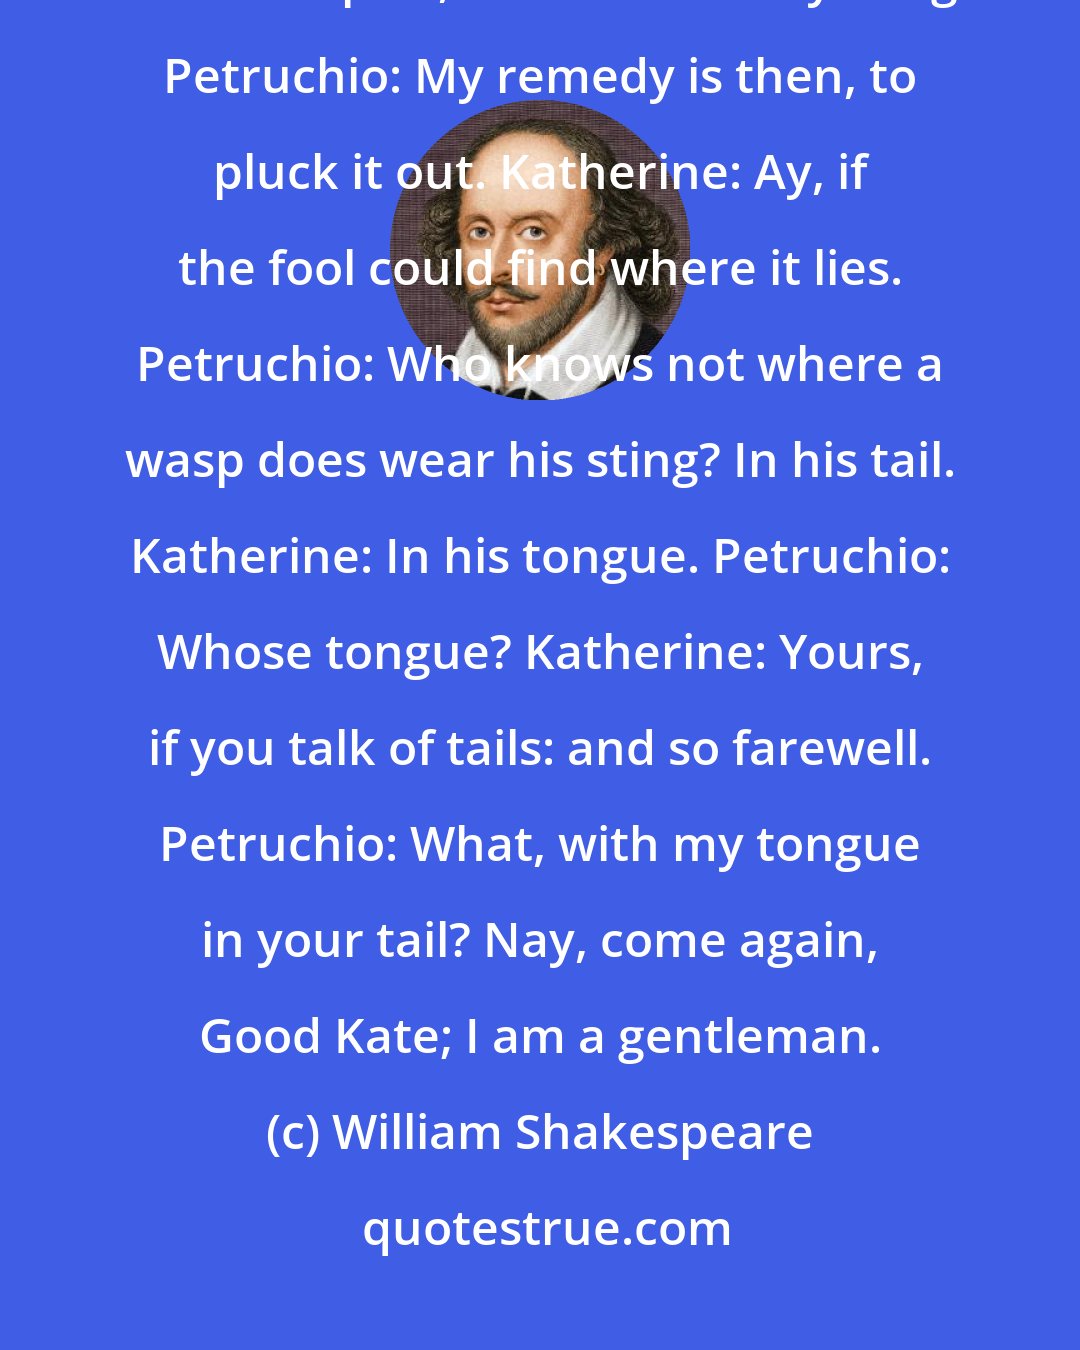 William Shakespeare: Petruchio: Come, come, you wasp; i' faith, you are too angry. Katherine: If I be waspish, best beware my sting. Petruchio: My remedy is then, to pluck it out. Katherine: Ay, if the fool could find where it lies. Petruchio: Who knows not where a wasp does wear his sting? In his tail. Katherine: In his tongue. Petruchio: Whose tongue? Katherine: Yours, if you talk of tails: and so farewell. Petruchio: What, with my tongue in your tail? Nay, come again, Good Kate; I am a gentleman.